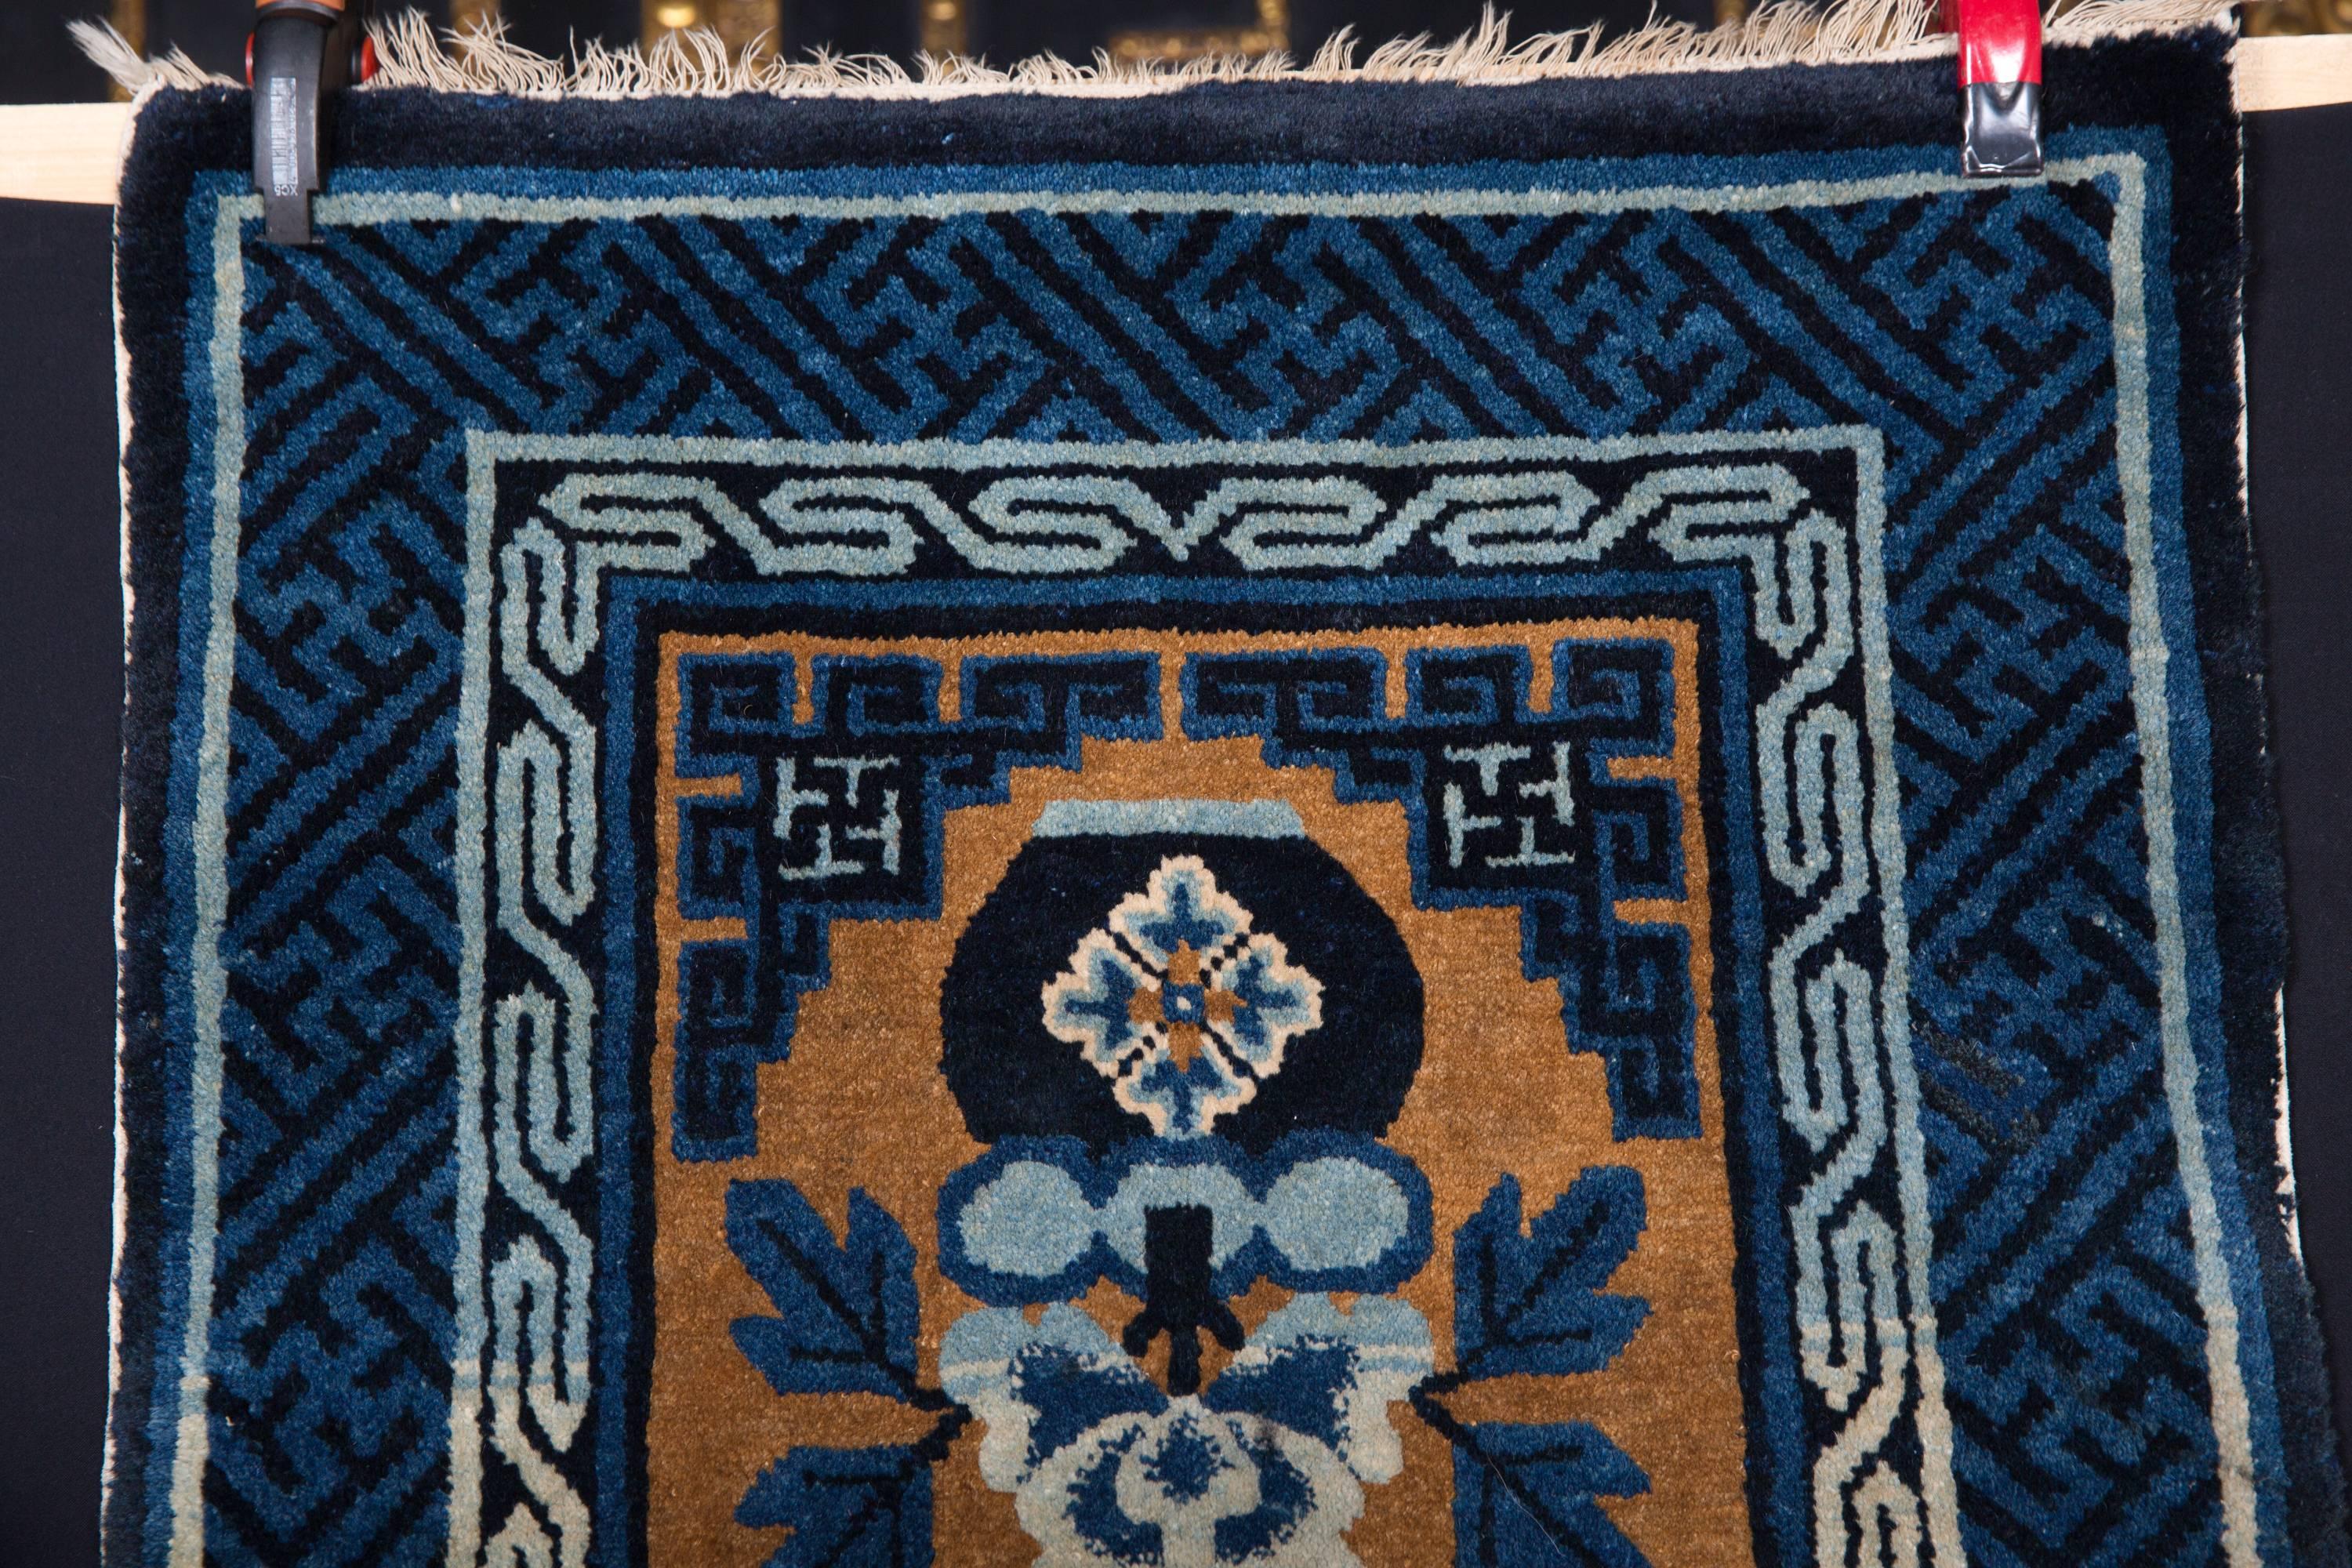 Beautiful rare Beijing carpet. From Berlin villa resolution.

Please take a look at the detailed pictures.